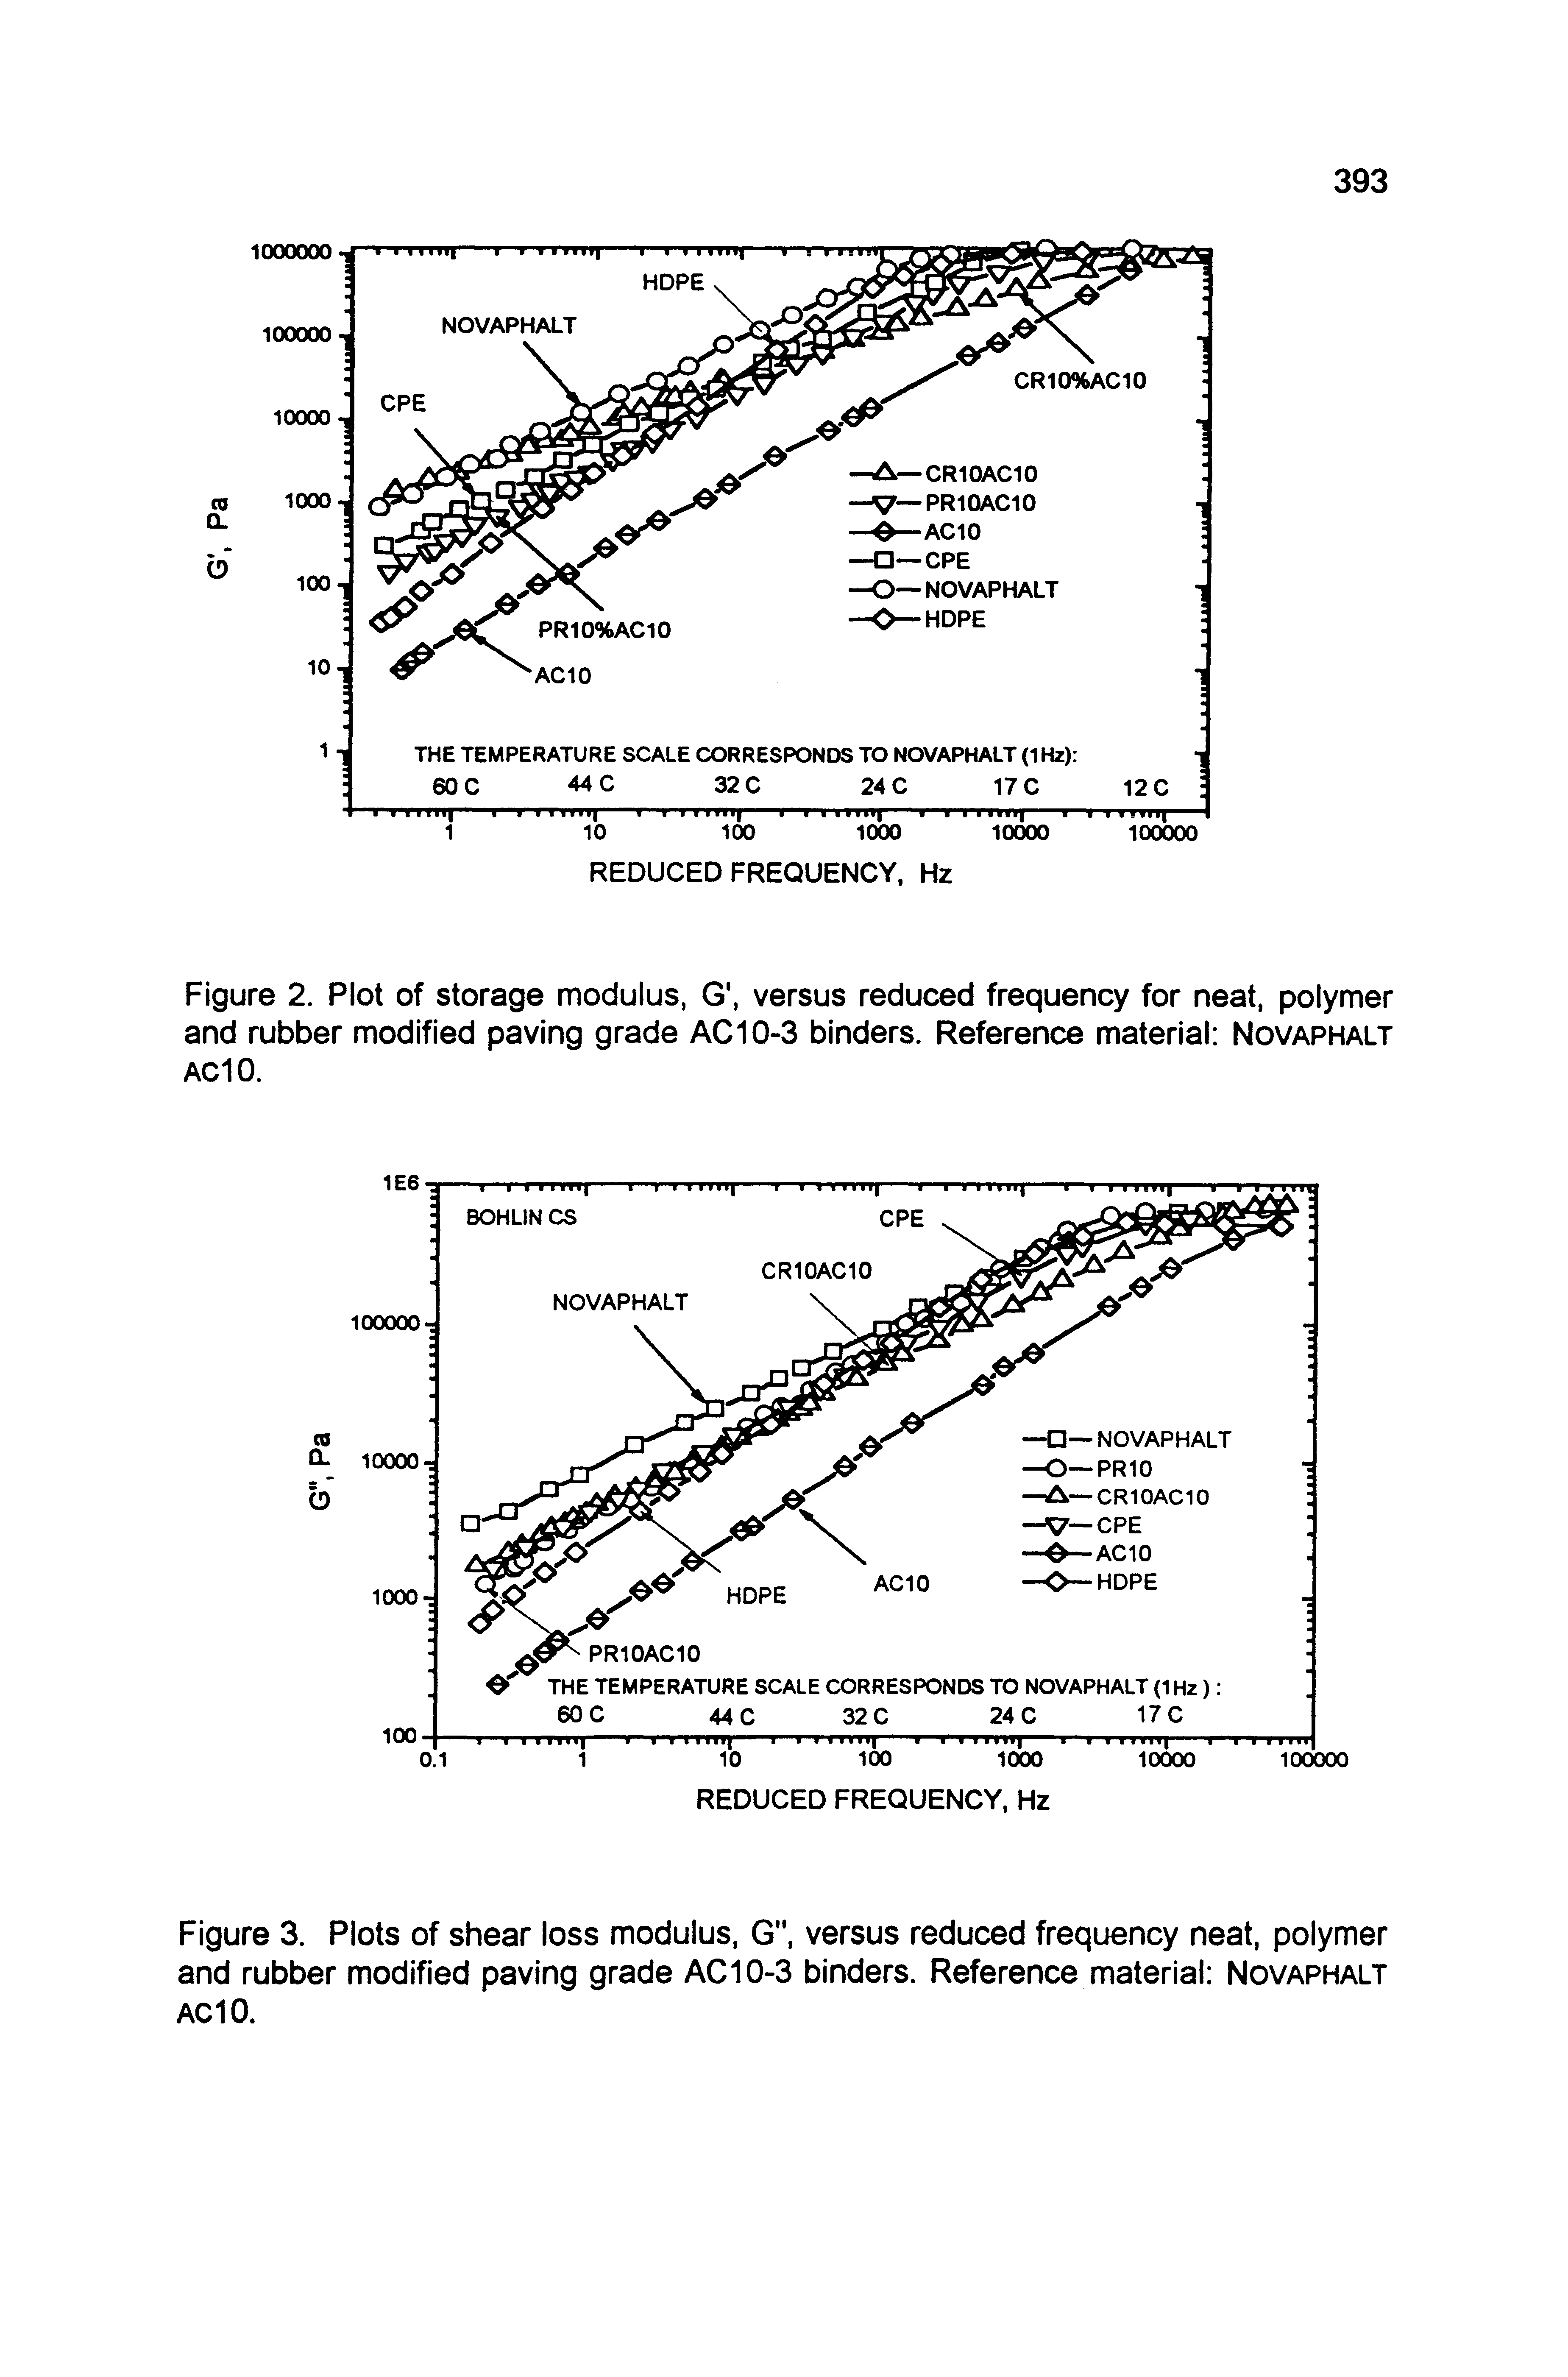 Figure 3. Plots of shear loss modulus, G", versus reduced frequency neat, polymer and rubber modified paving grade AC10-3 binders. Reference material Novaphalt AC10.